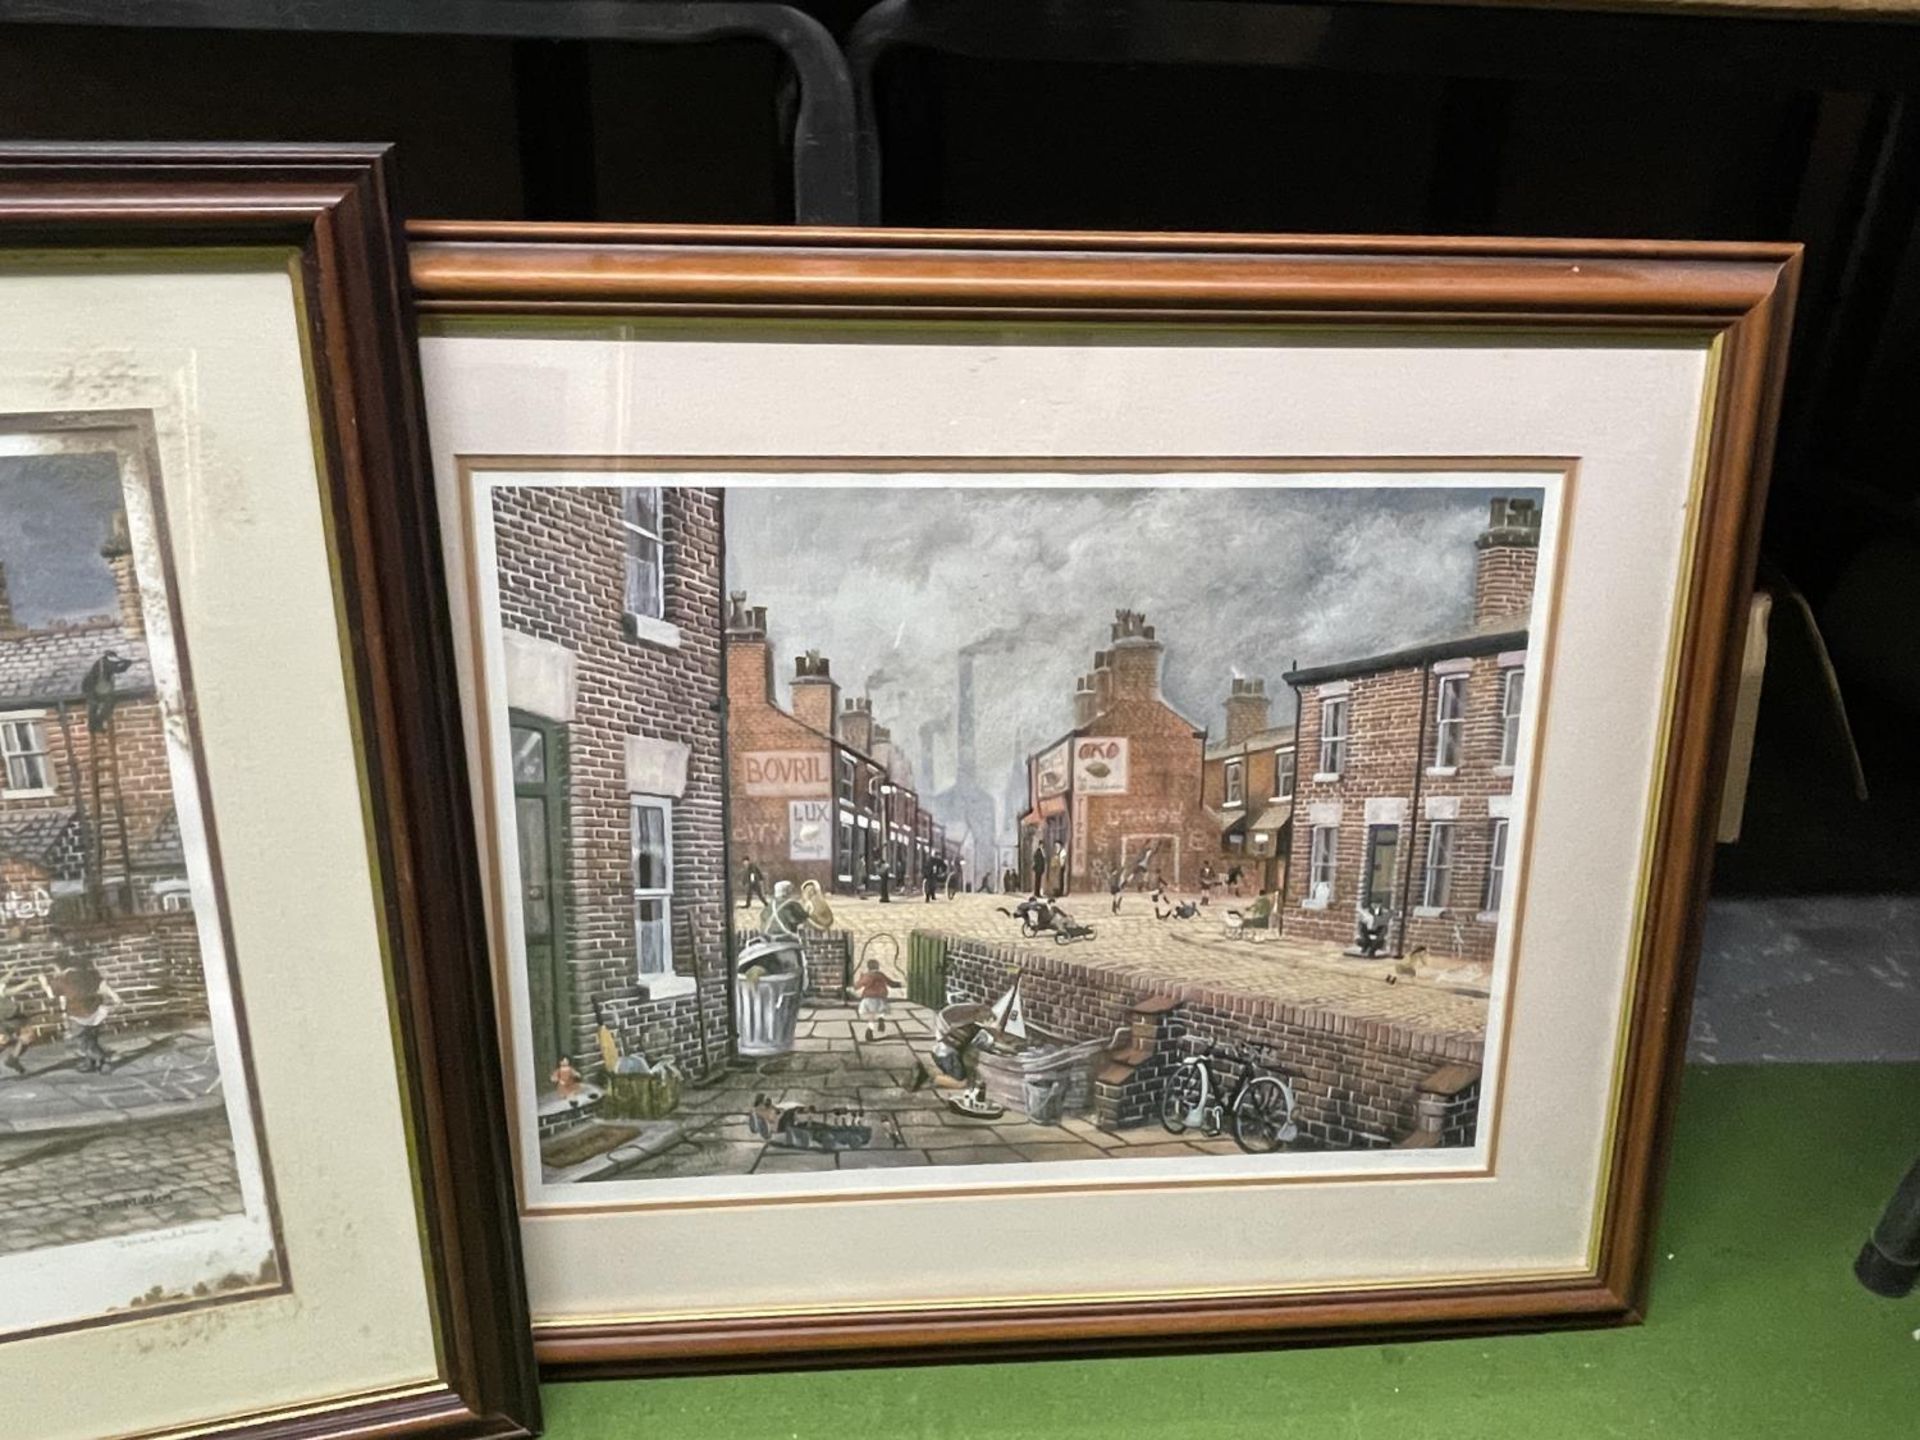 TWO LARGE FRAMED LIMITED EDITION PRINTS BY BERNARD McMULLEN ONE ENTITLED "OPEN ALL HOURS" - Image 3 of 3